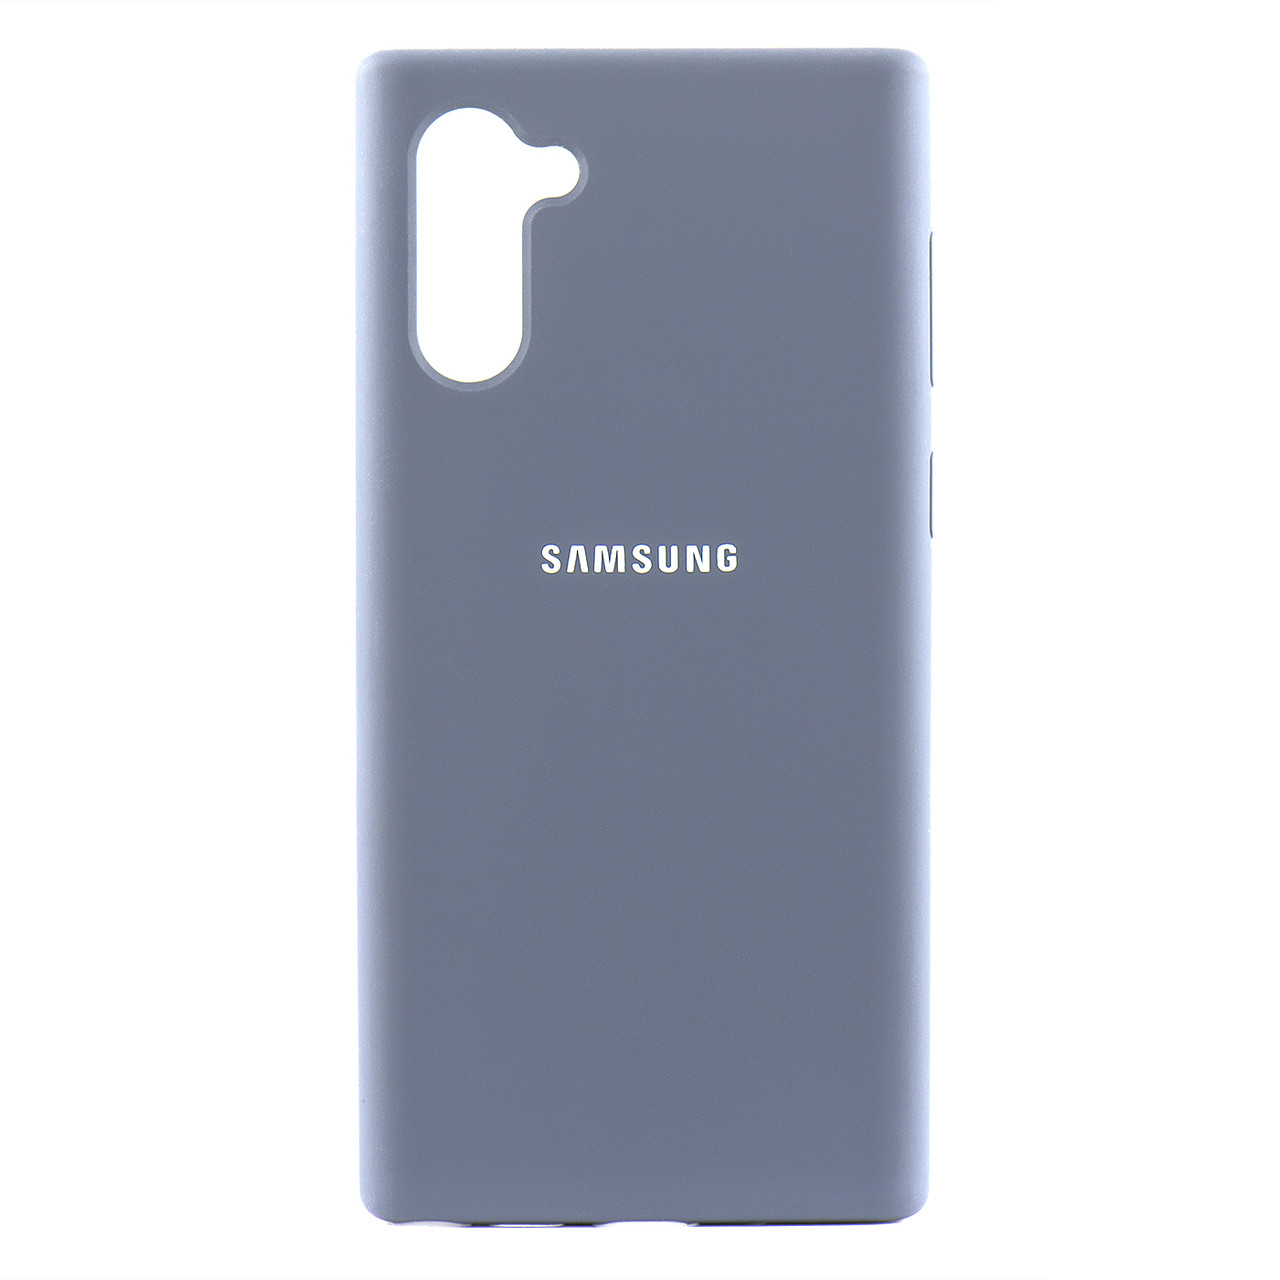 Чехол для Samsung Galaxy Note 10 back cover Silky and soft-touch Silicone Cover, Gray - фото 1 - id-p115023897